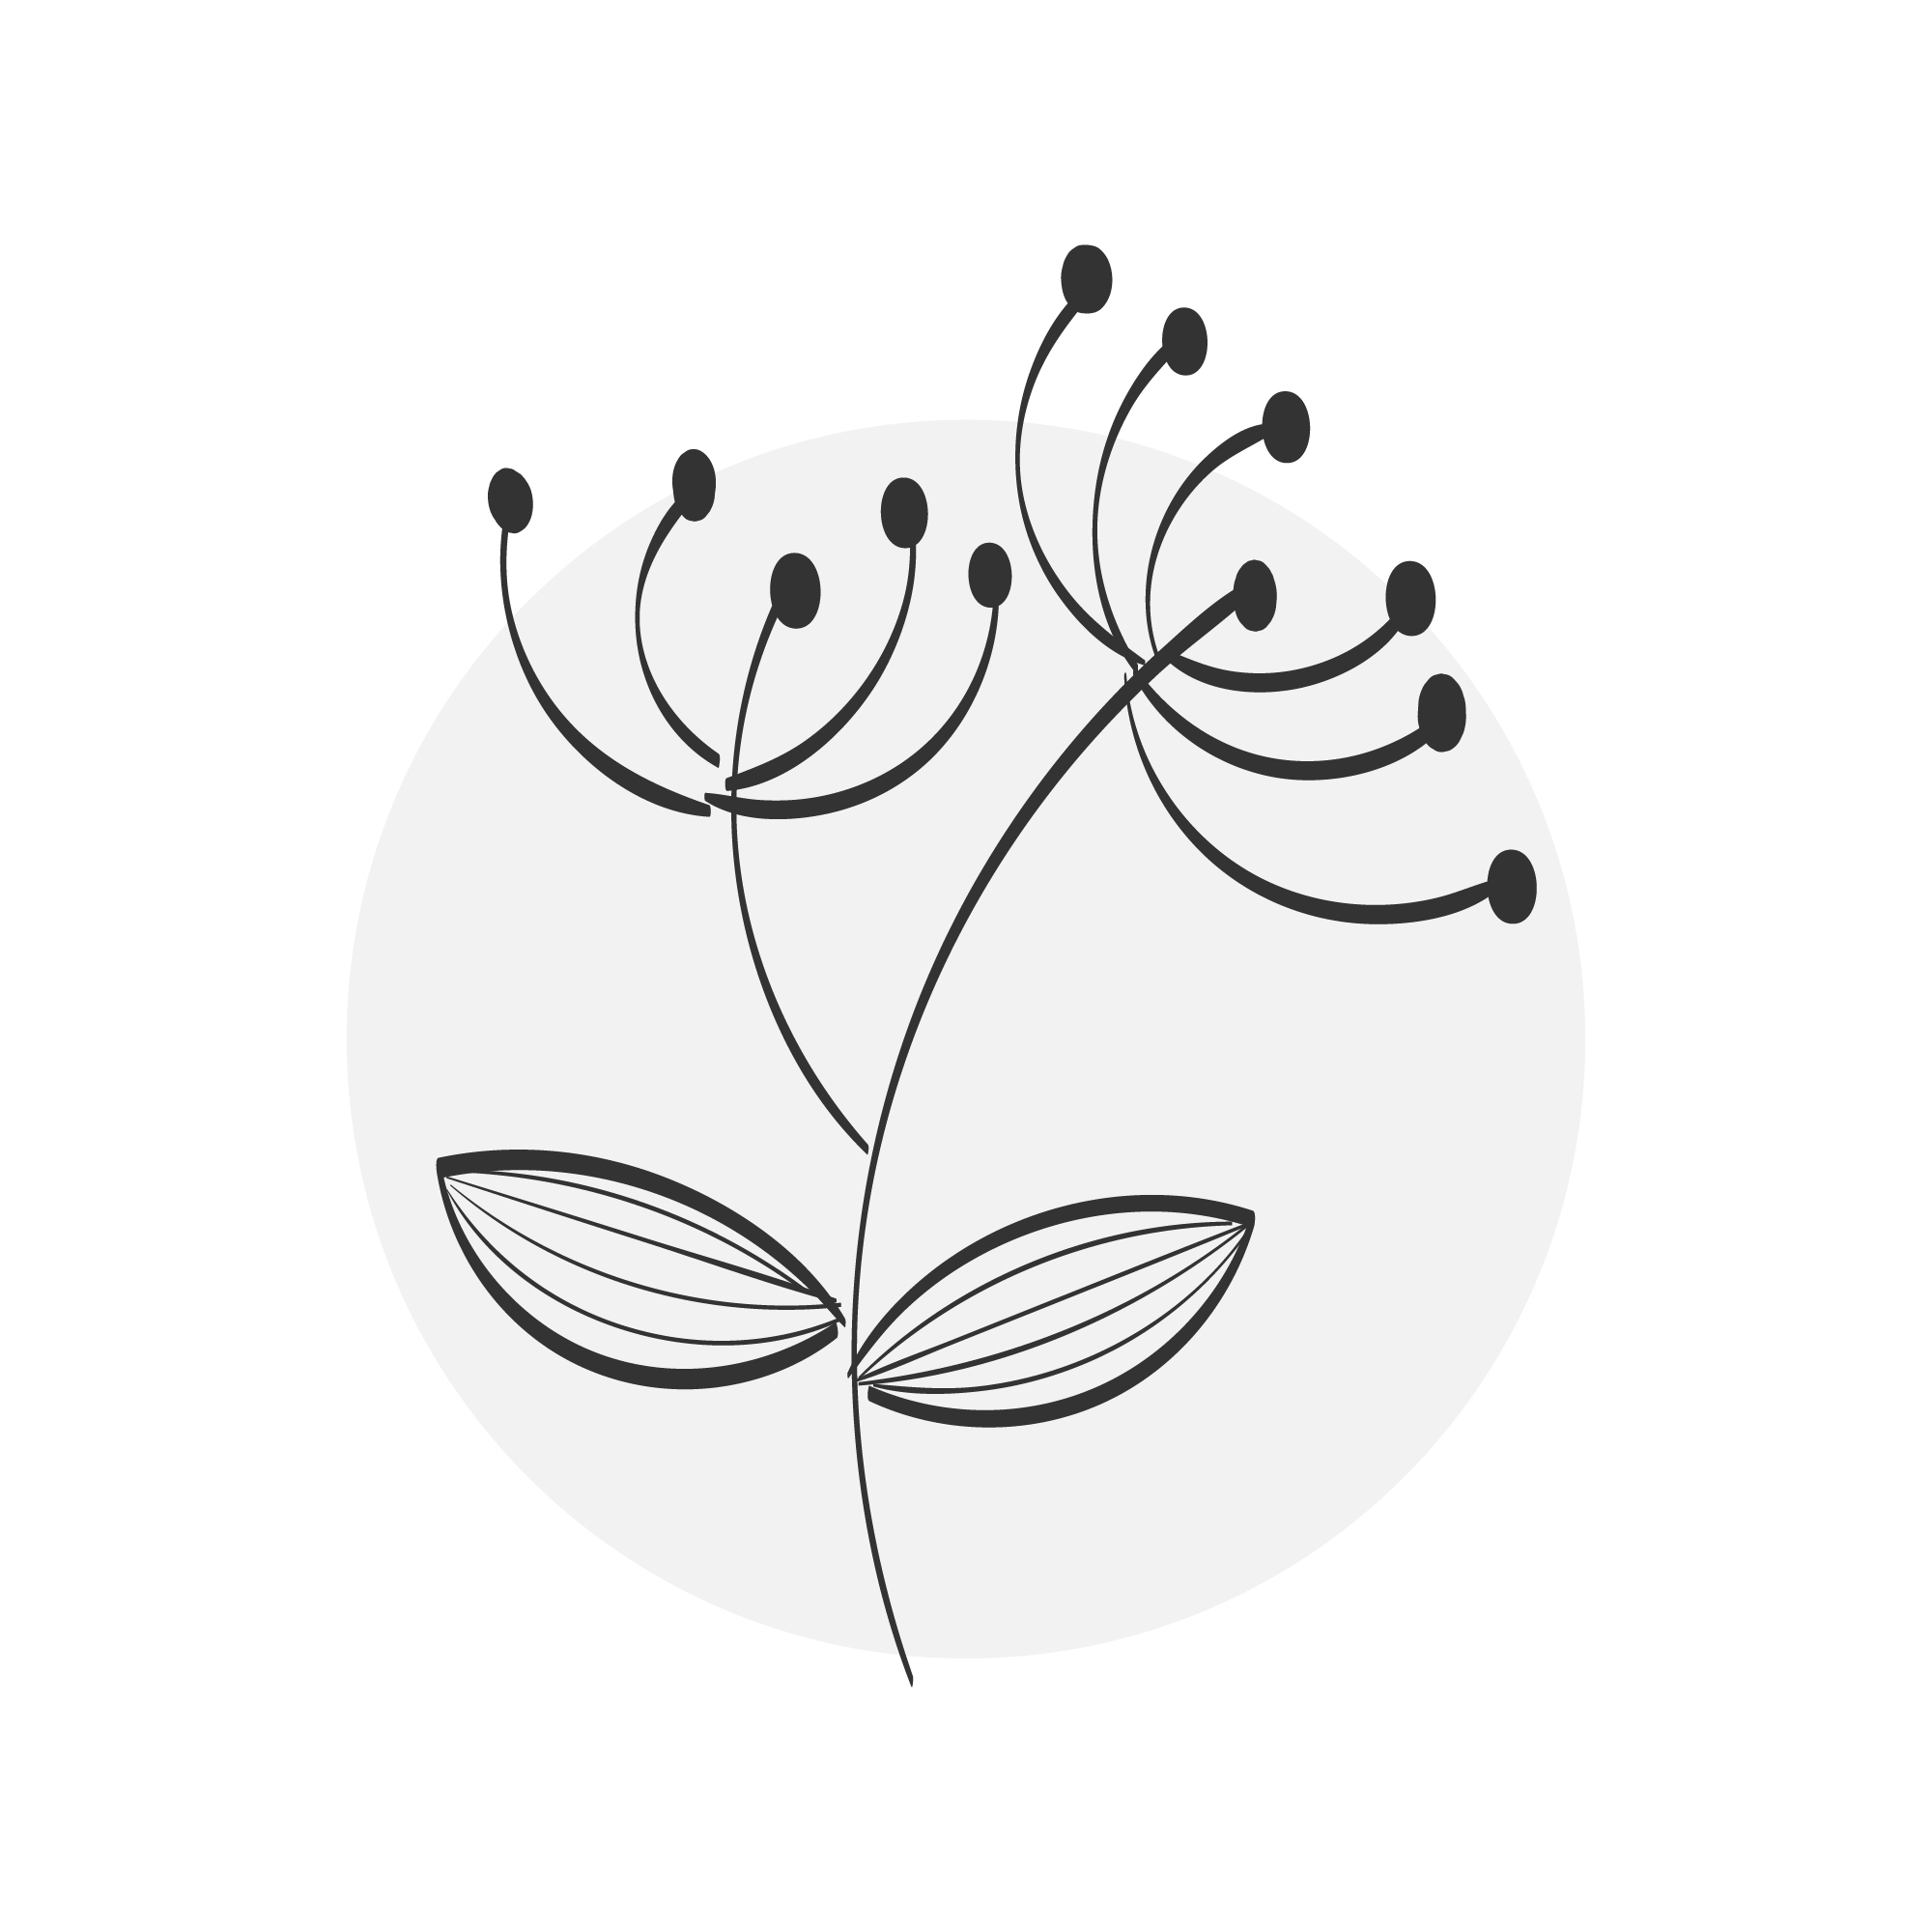 10 Flower Drawing With Line-Art for branding.